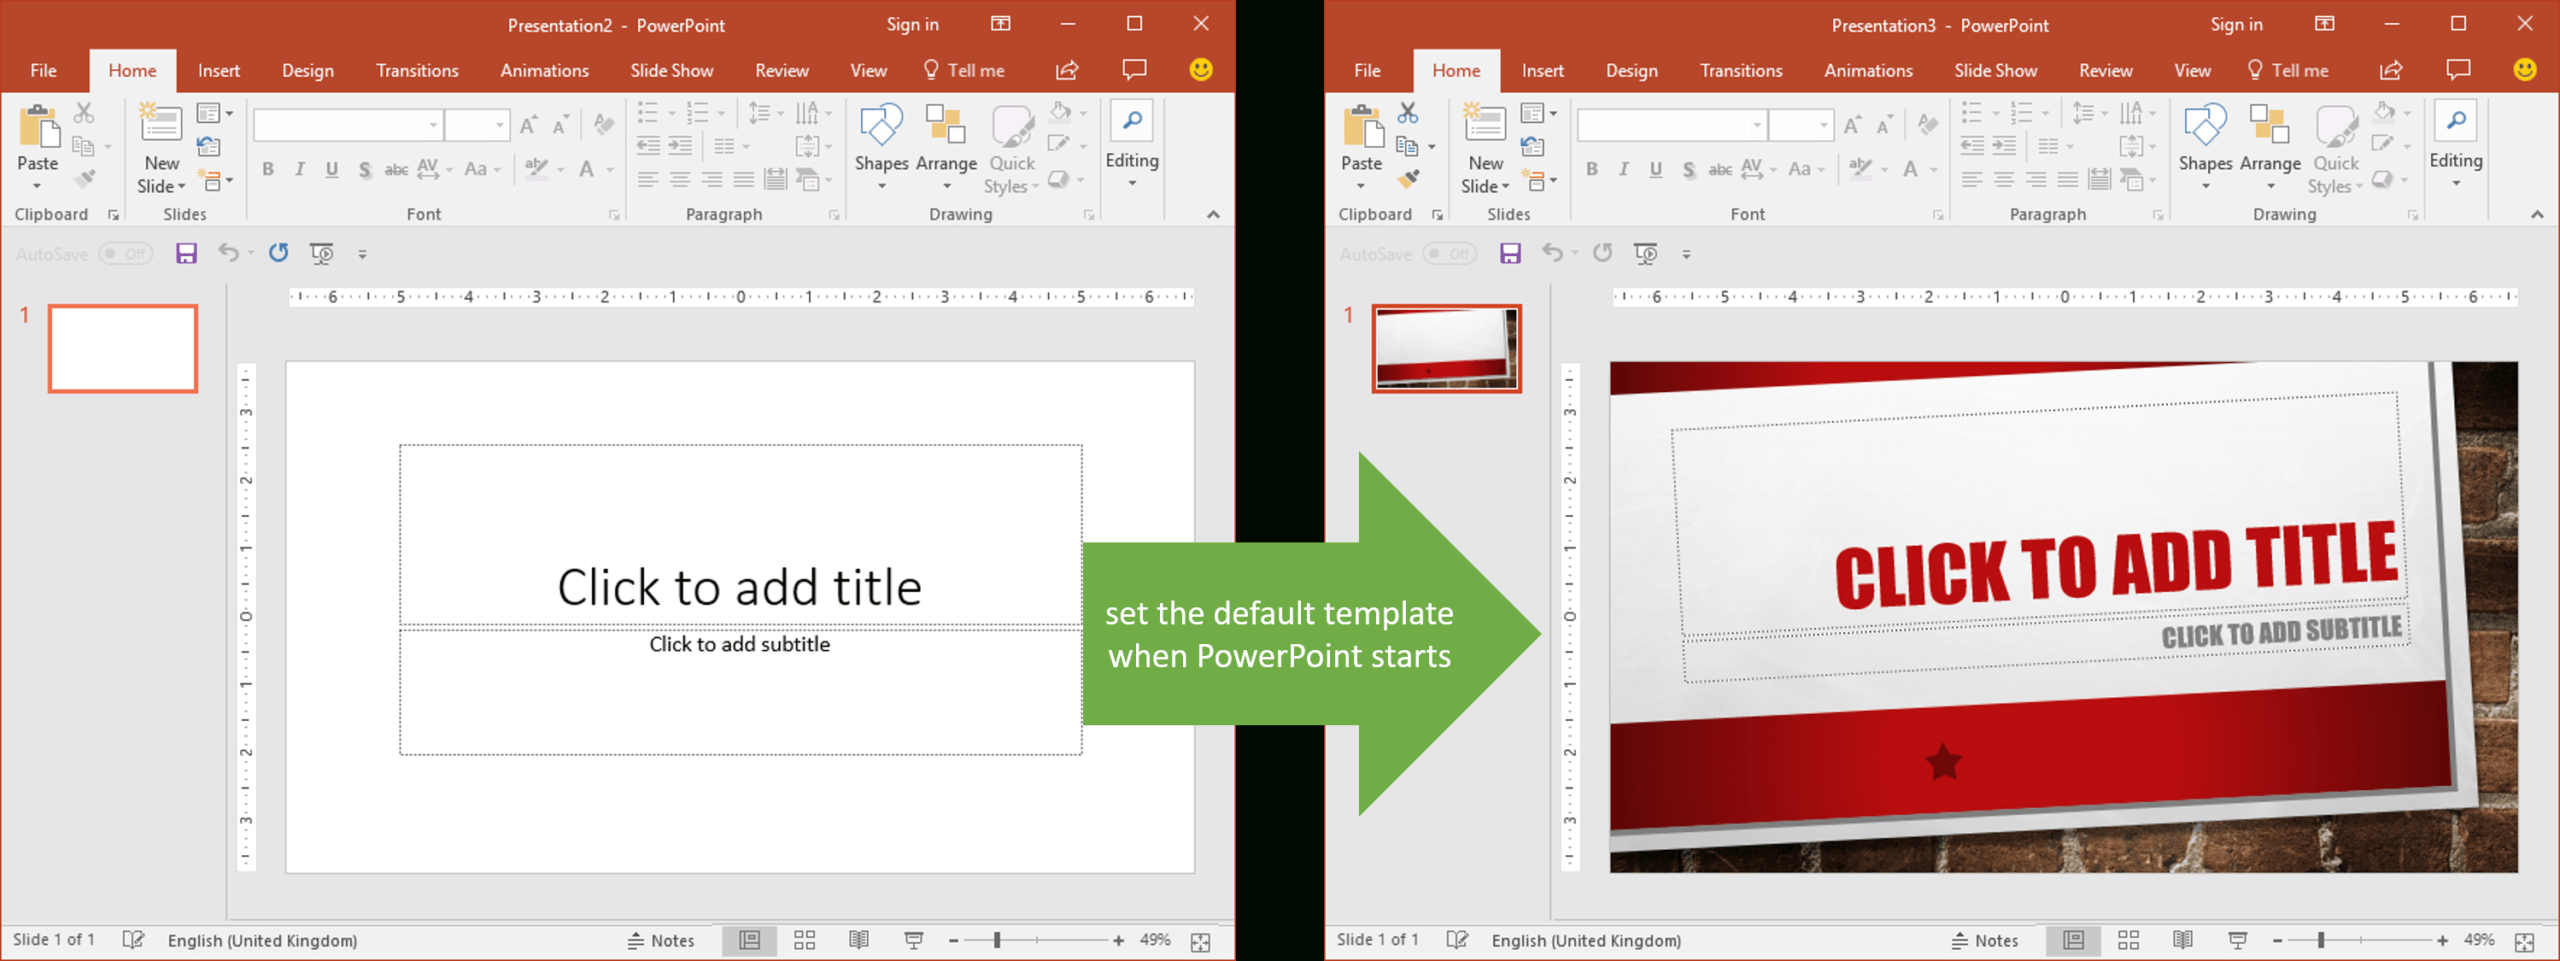 Set The Default Template When Powerpoint Starts | Youpresent Regarding How To Change Template In Powerpoint